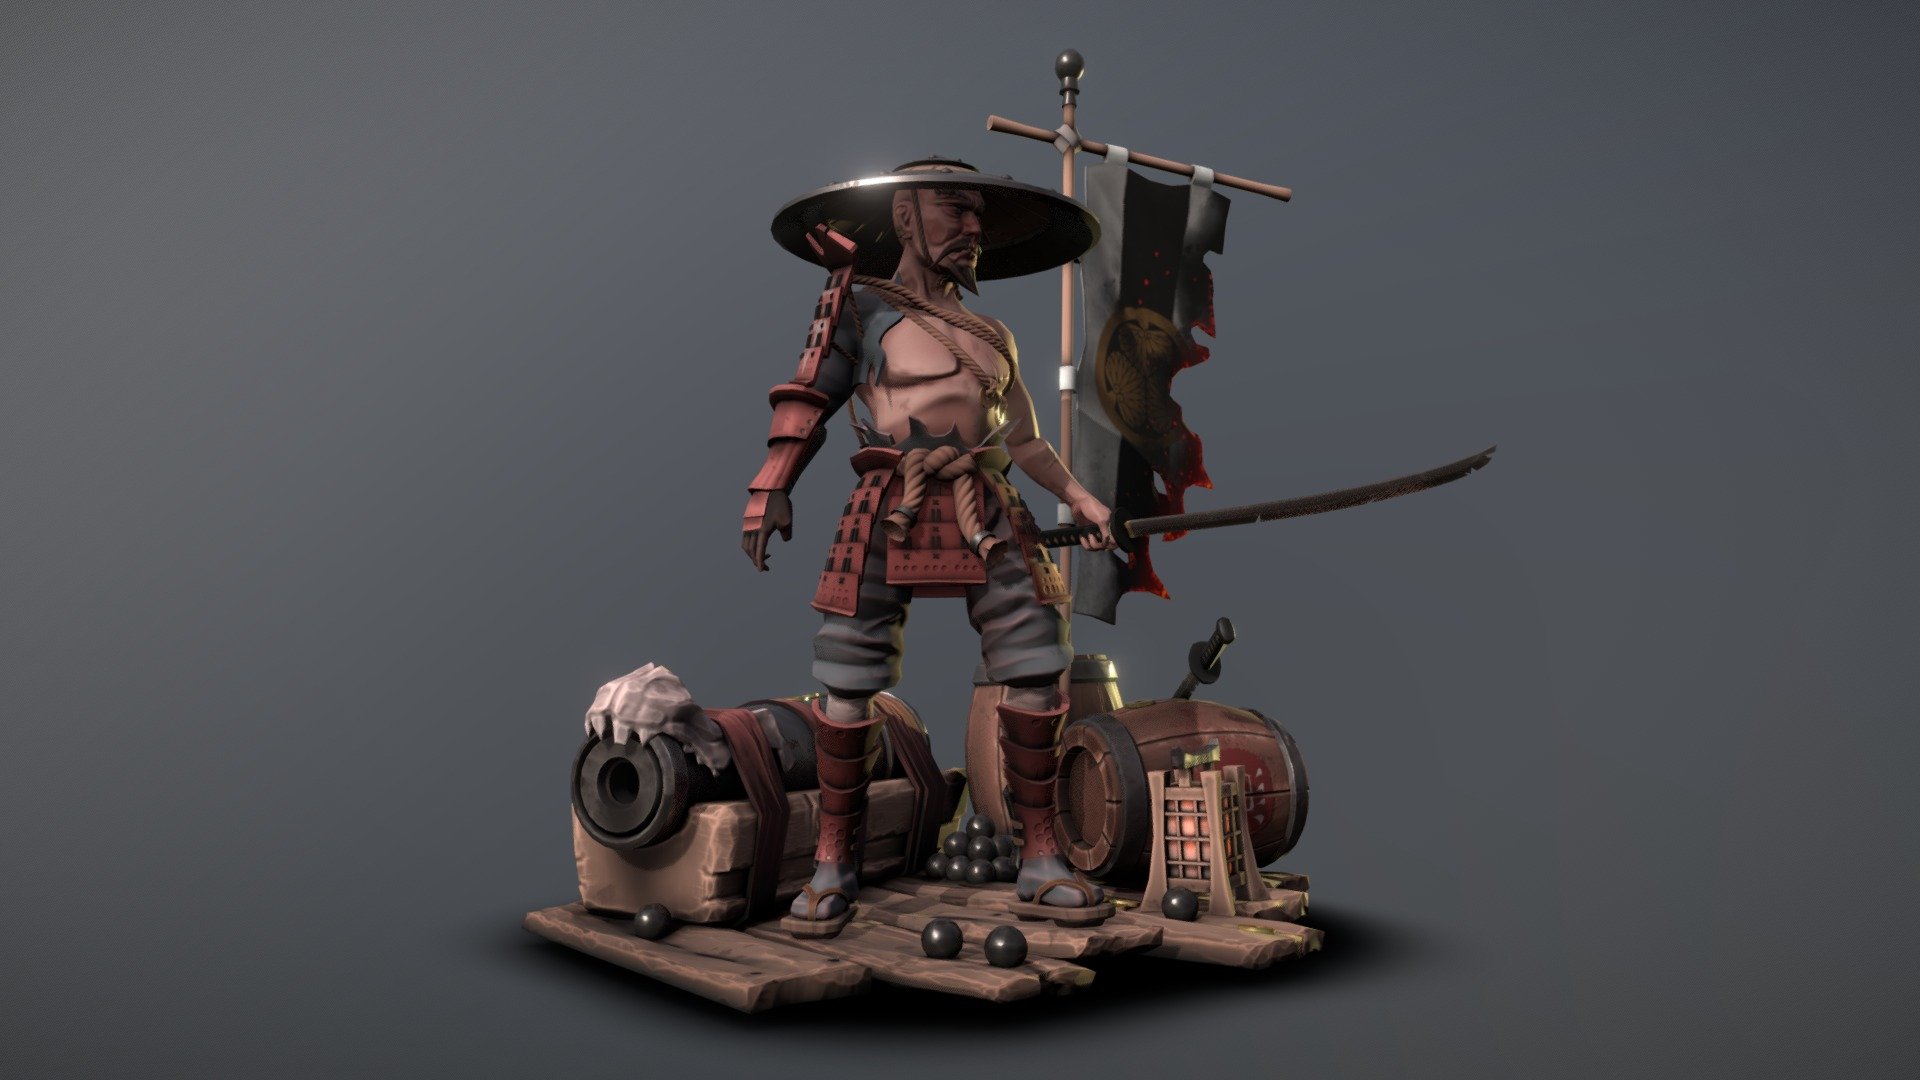 Sea of thieves inspired project 3d model